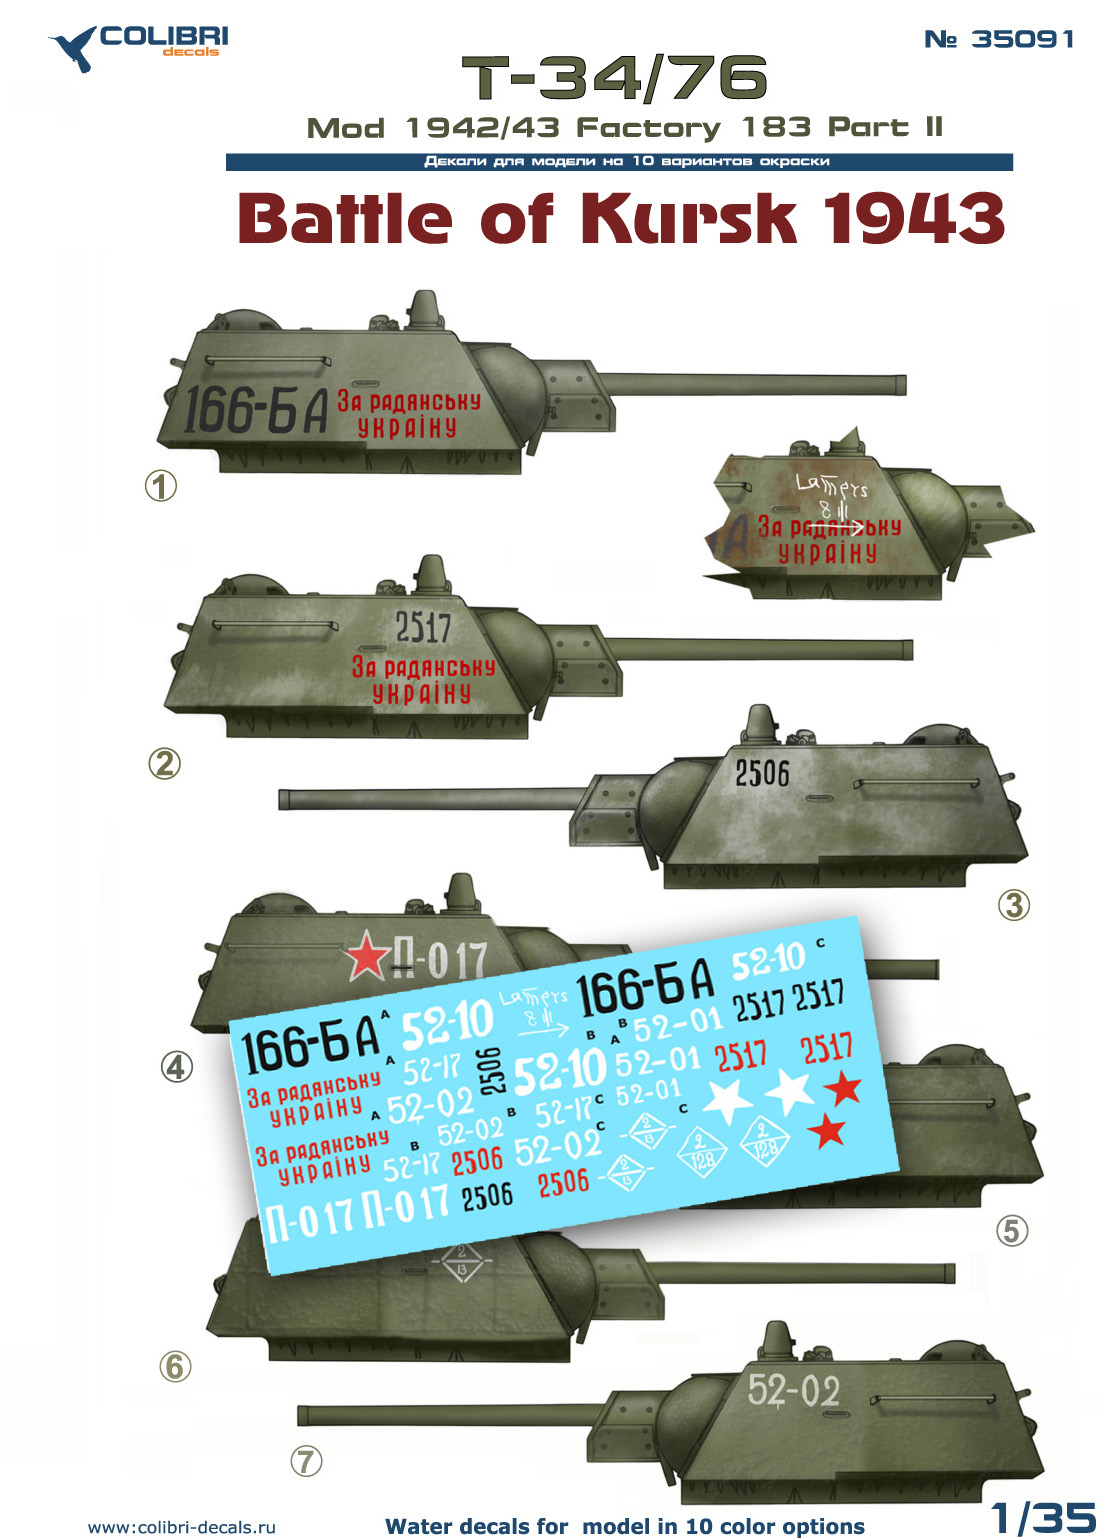 Decal 1/35 Т-34/76 мod 1942/43 Factory 183 Part II Battle of Kursk1943 (Colibri Decals)